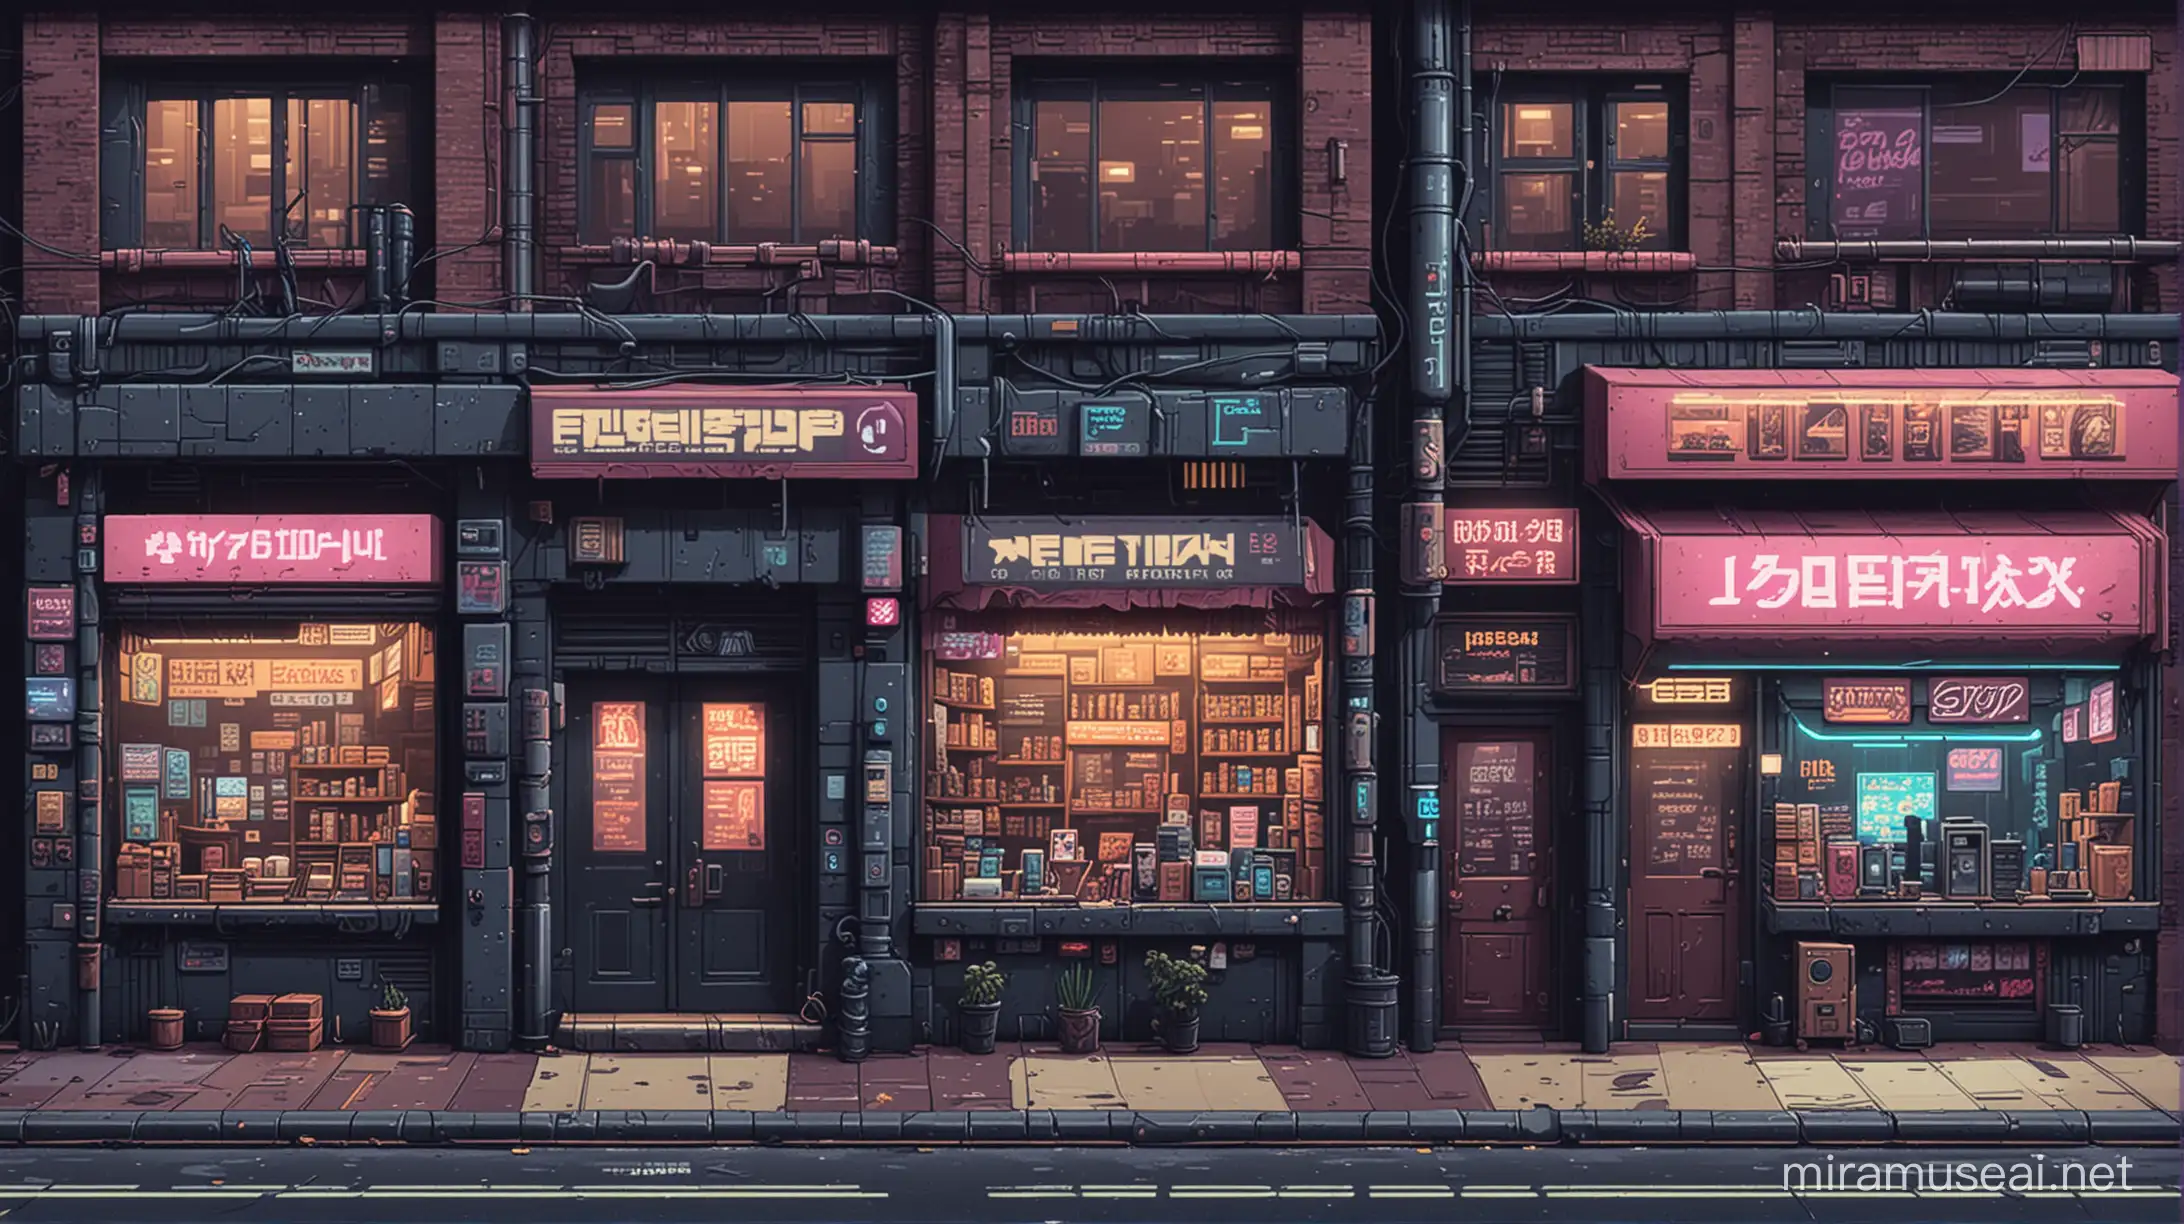 pixel art scene of cyberpunk storefronts in the style of classic platformer games like "Flashback". In the style of kirokaze.